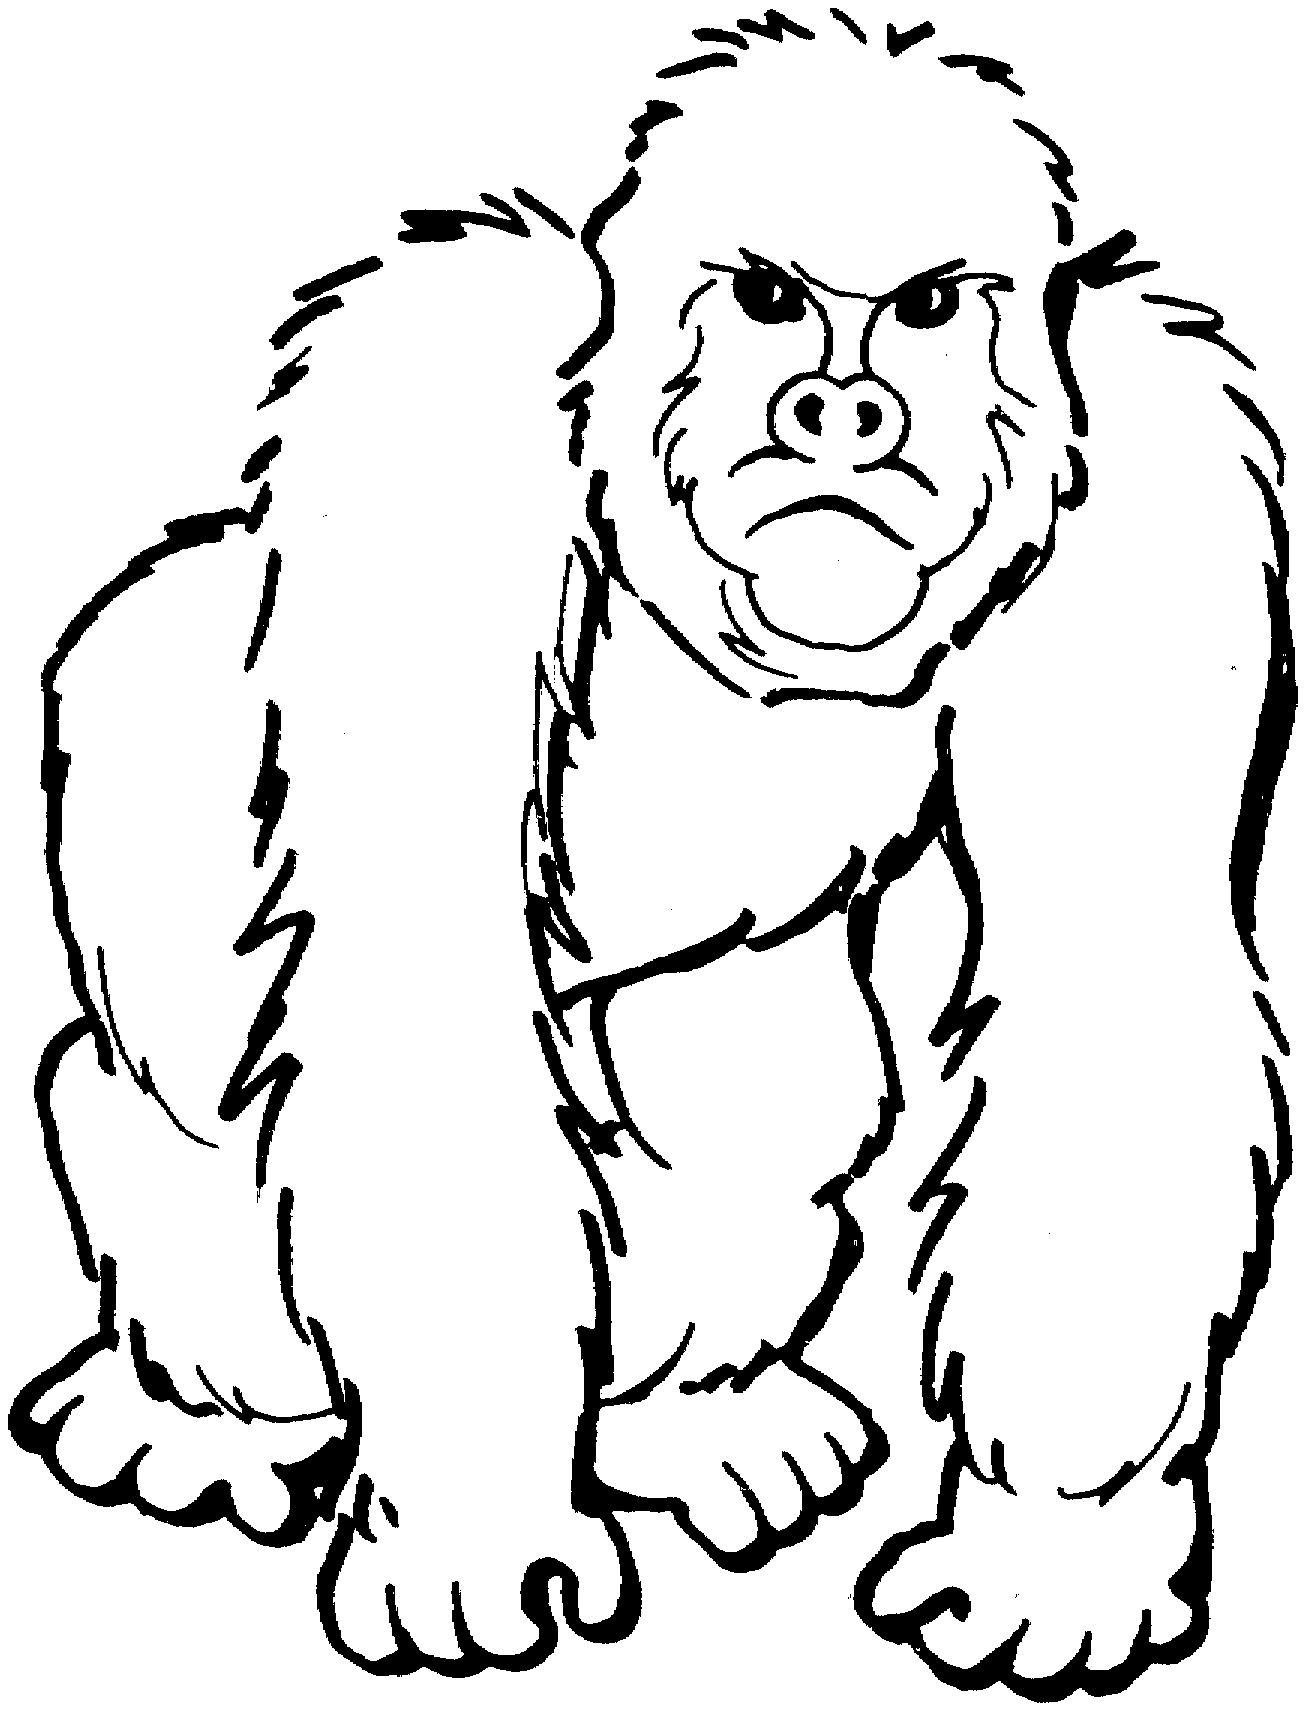 Gorilla Coloring Pages | Clipart Panda - Free Clipart Images